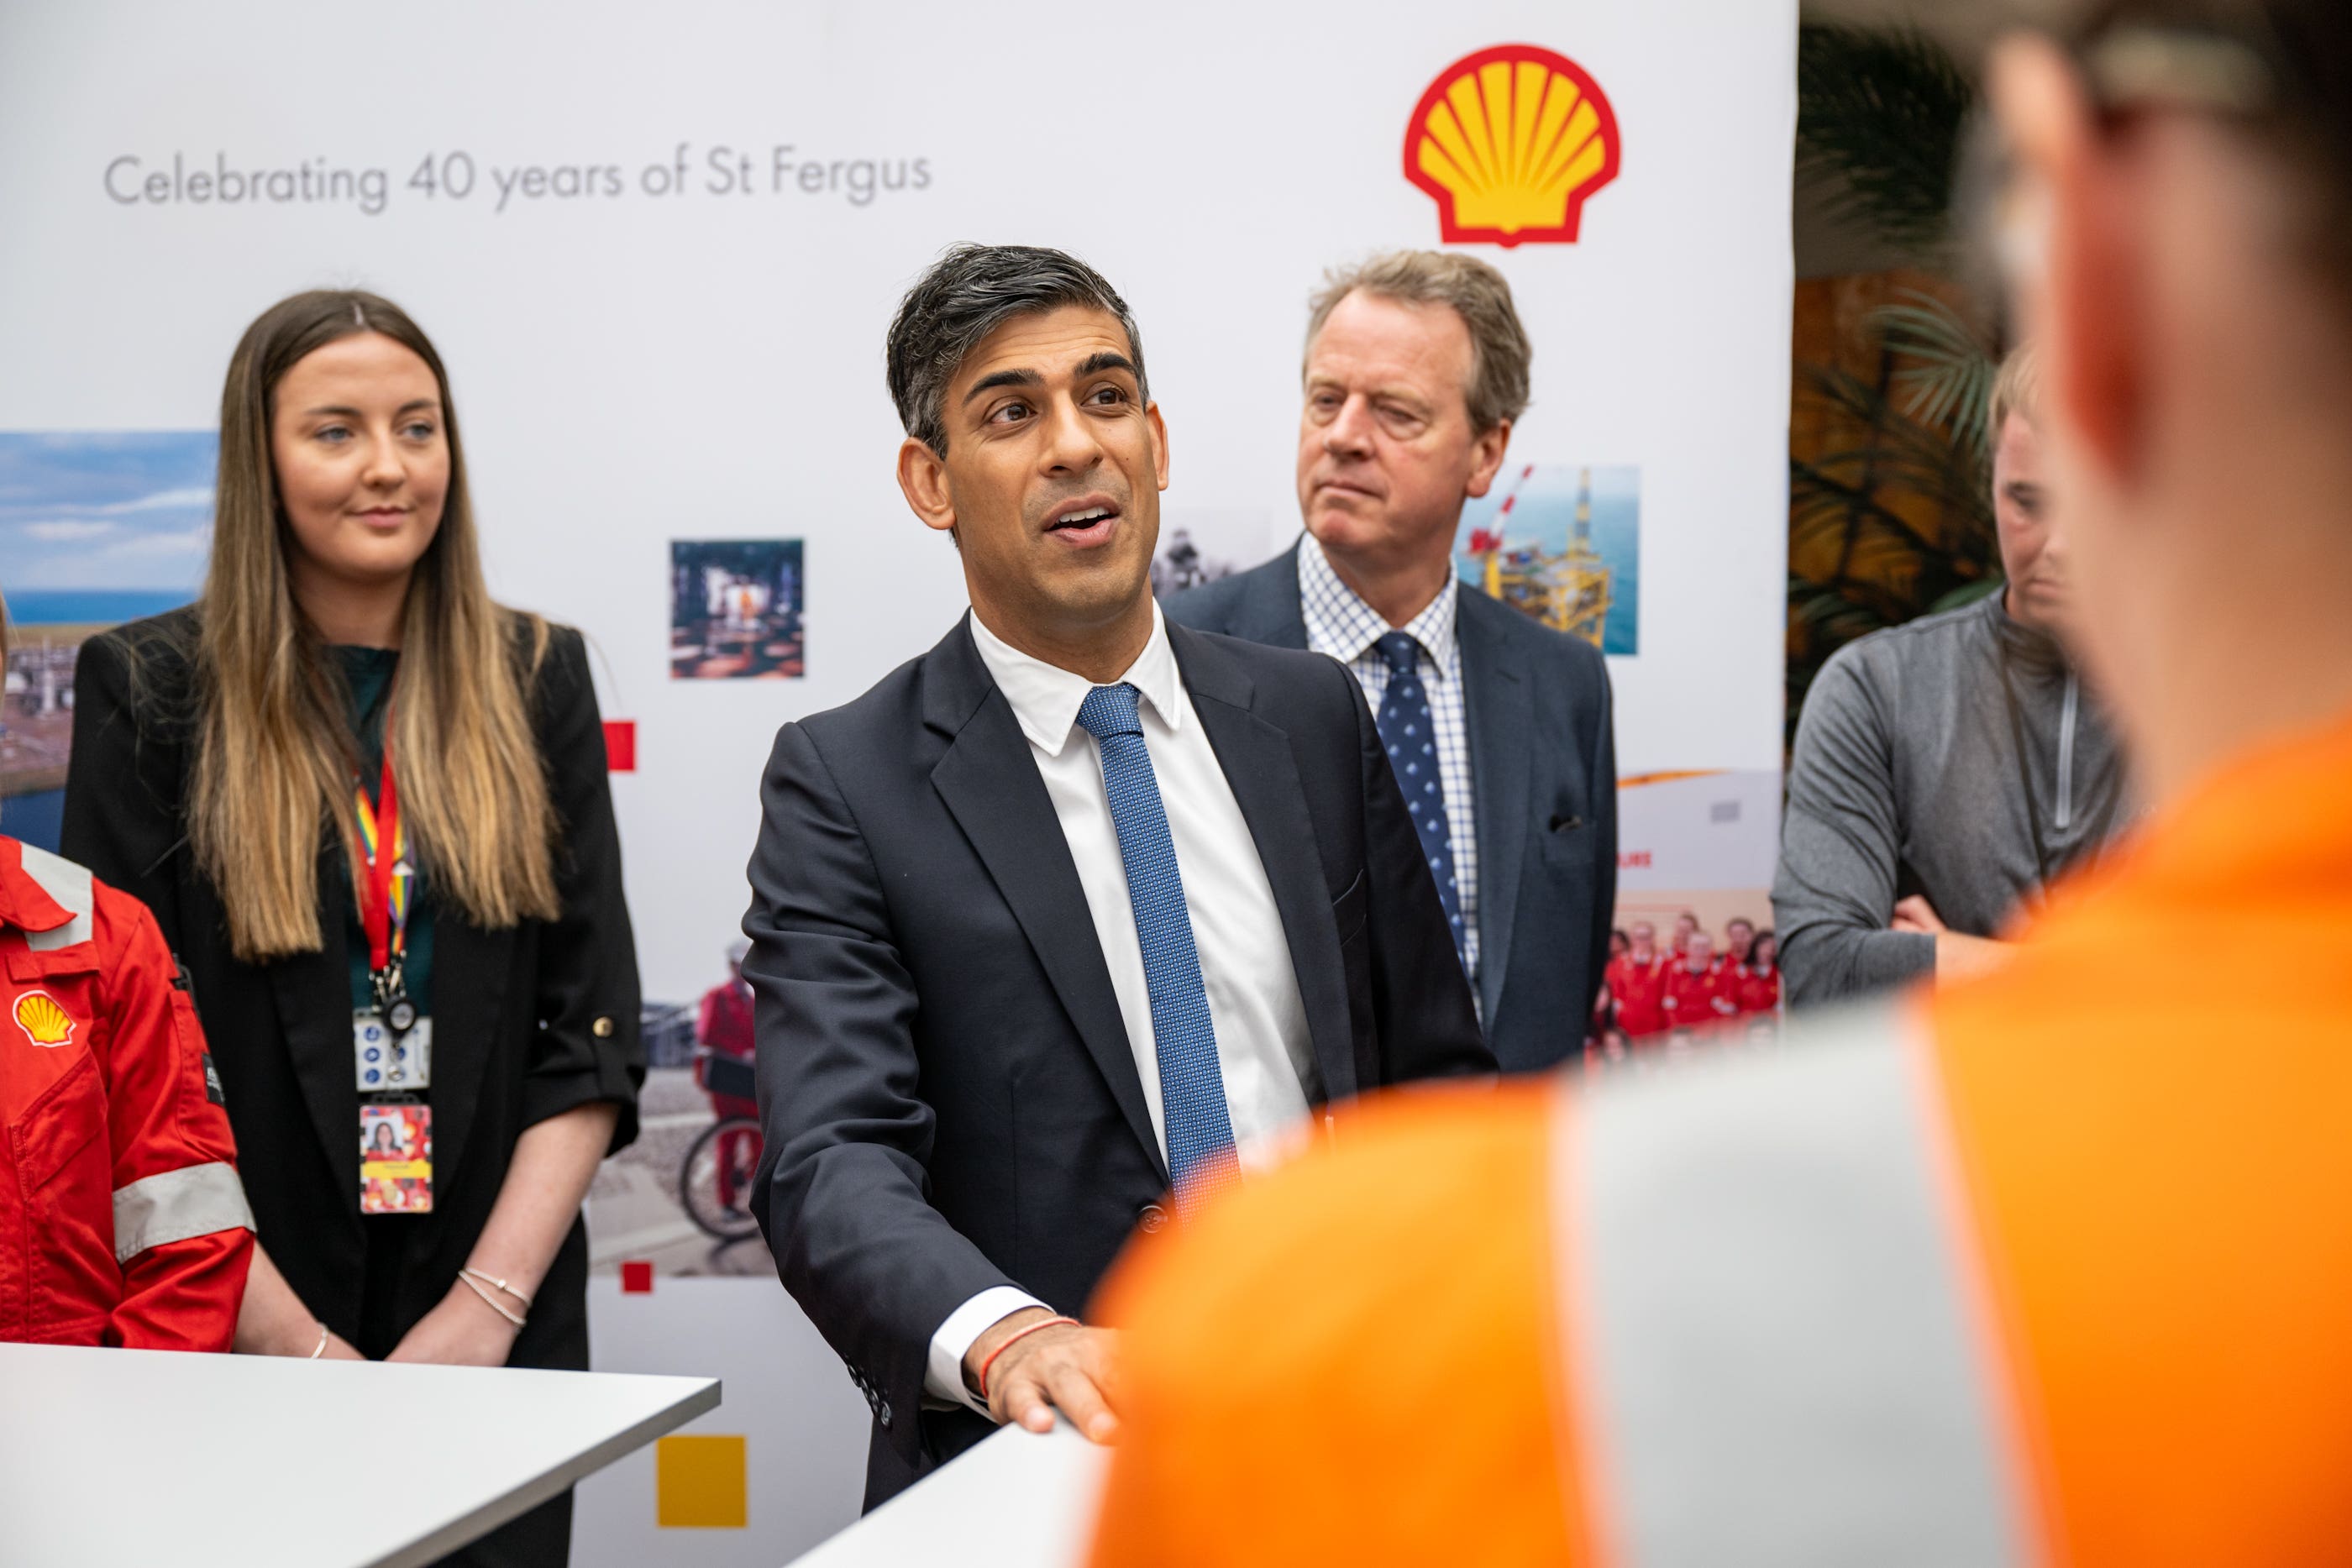 Prime Minister Rishi Sunak during his visit to Shell St Fergus Gas Plant in Peterhead, Aberdeenshire (Euan Duff/PA)